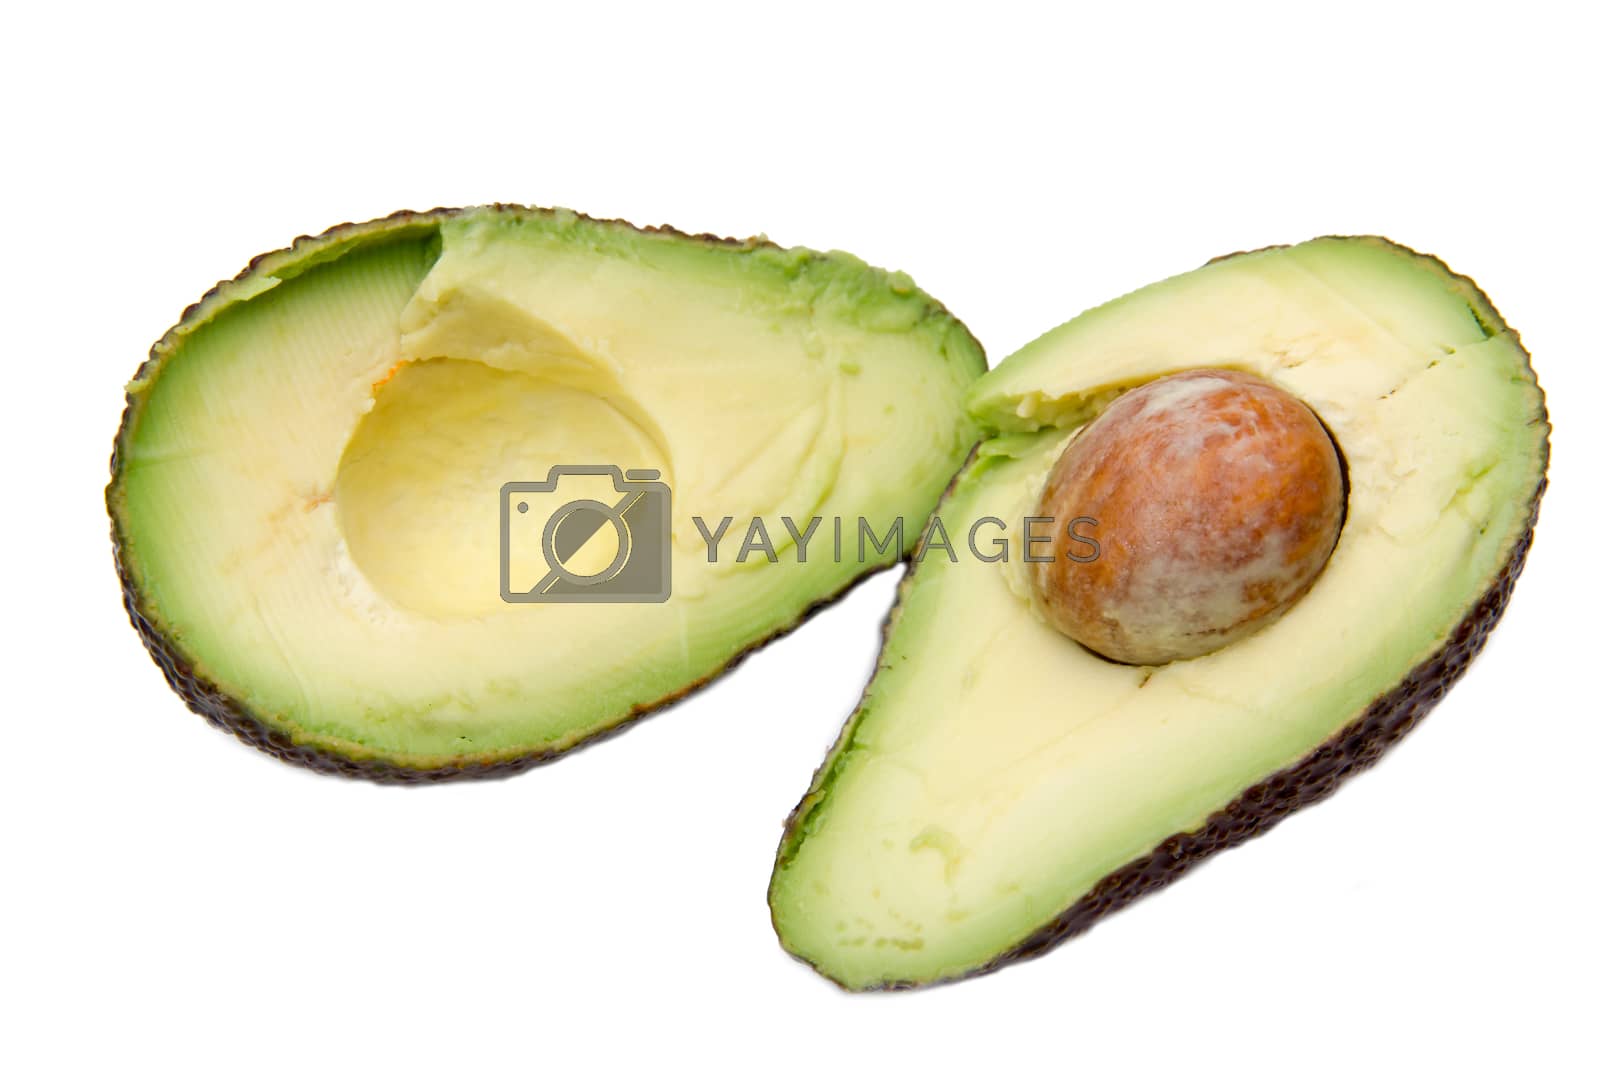 Royalty free image of Avocado cut by spafra